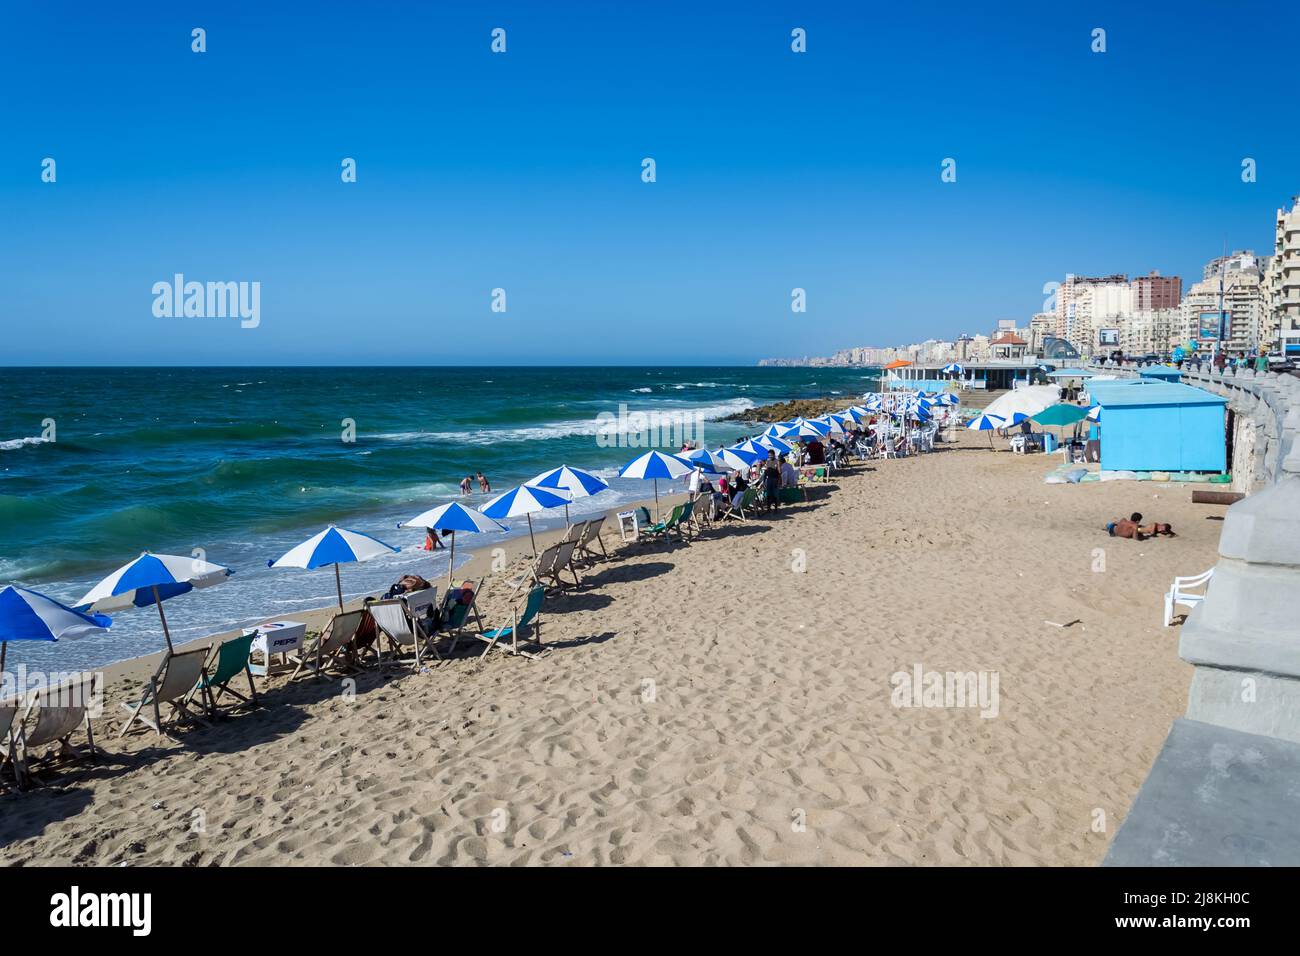 View of El Shatby Beach corniche, located at El Gaish street in the municipality of Alexandria, Egypt Stock Photo